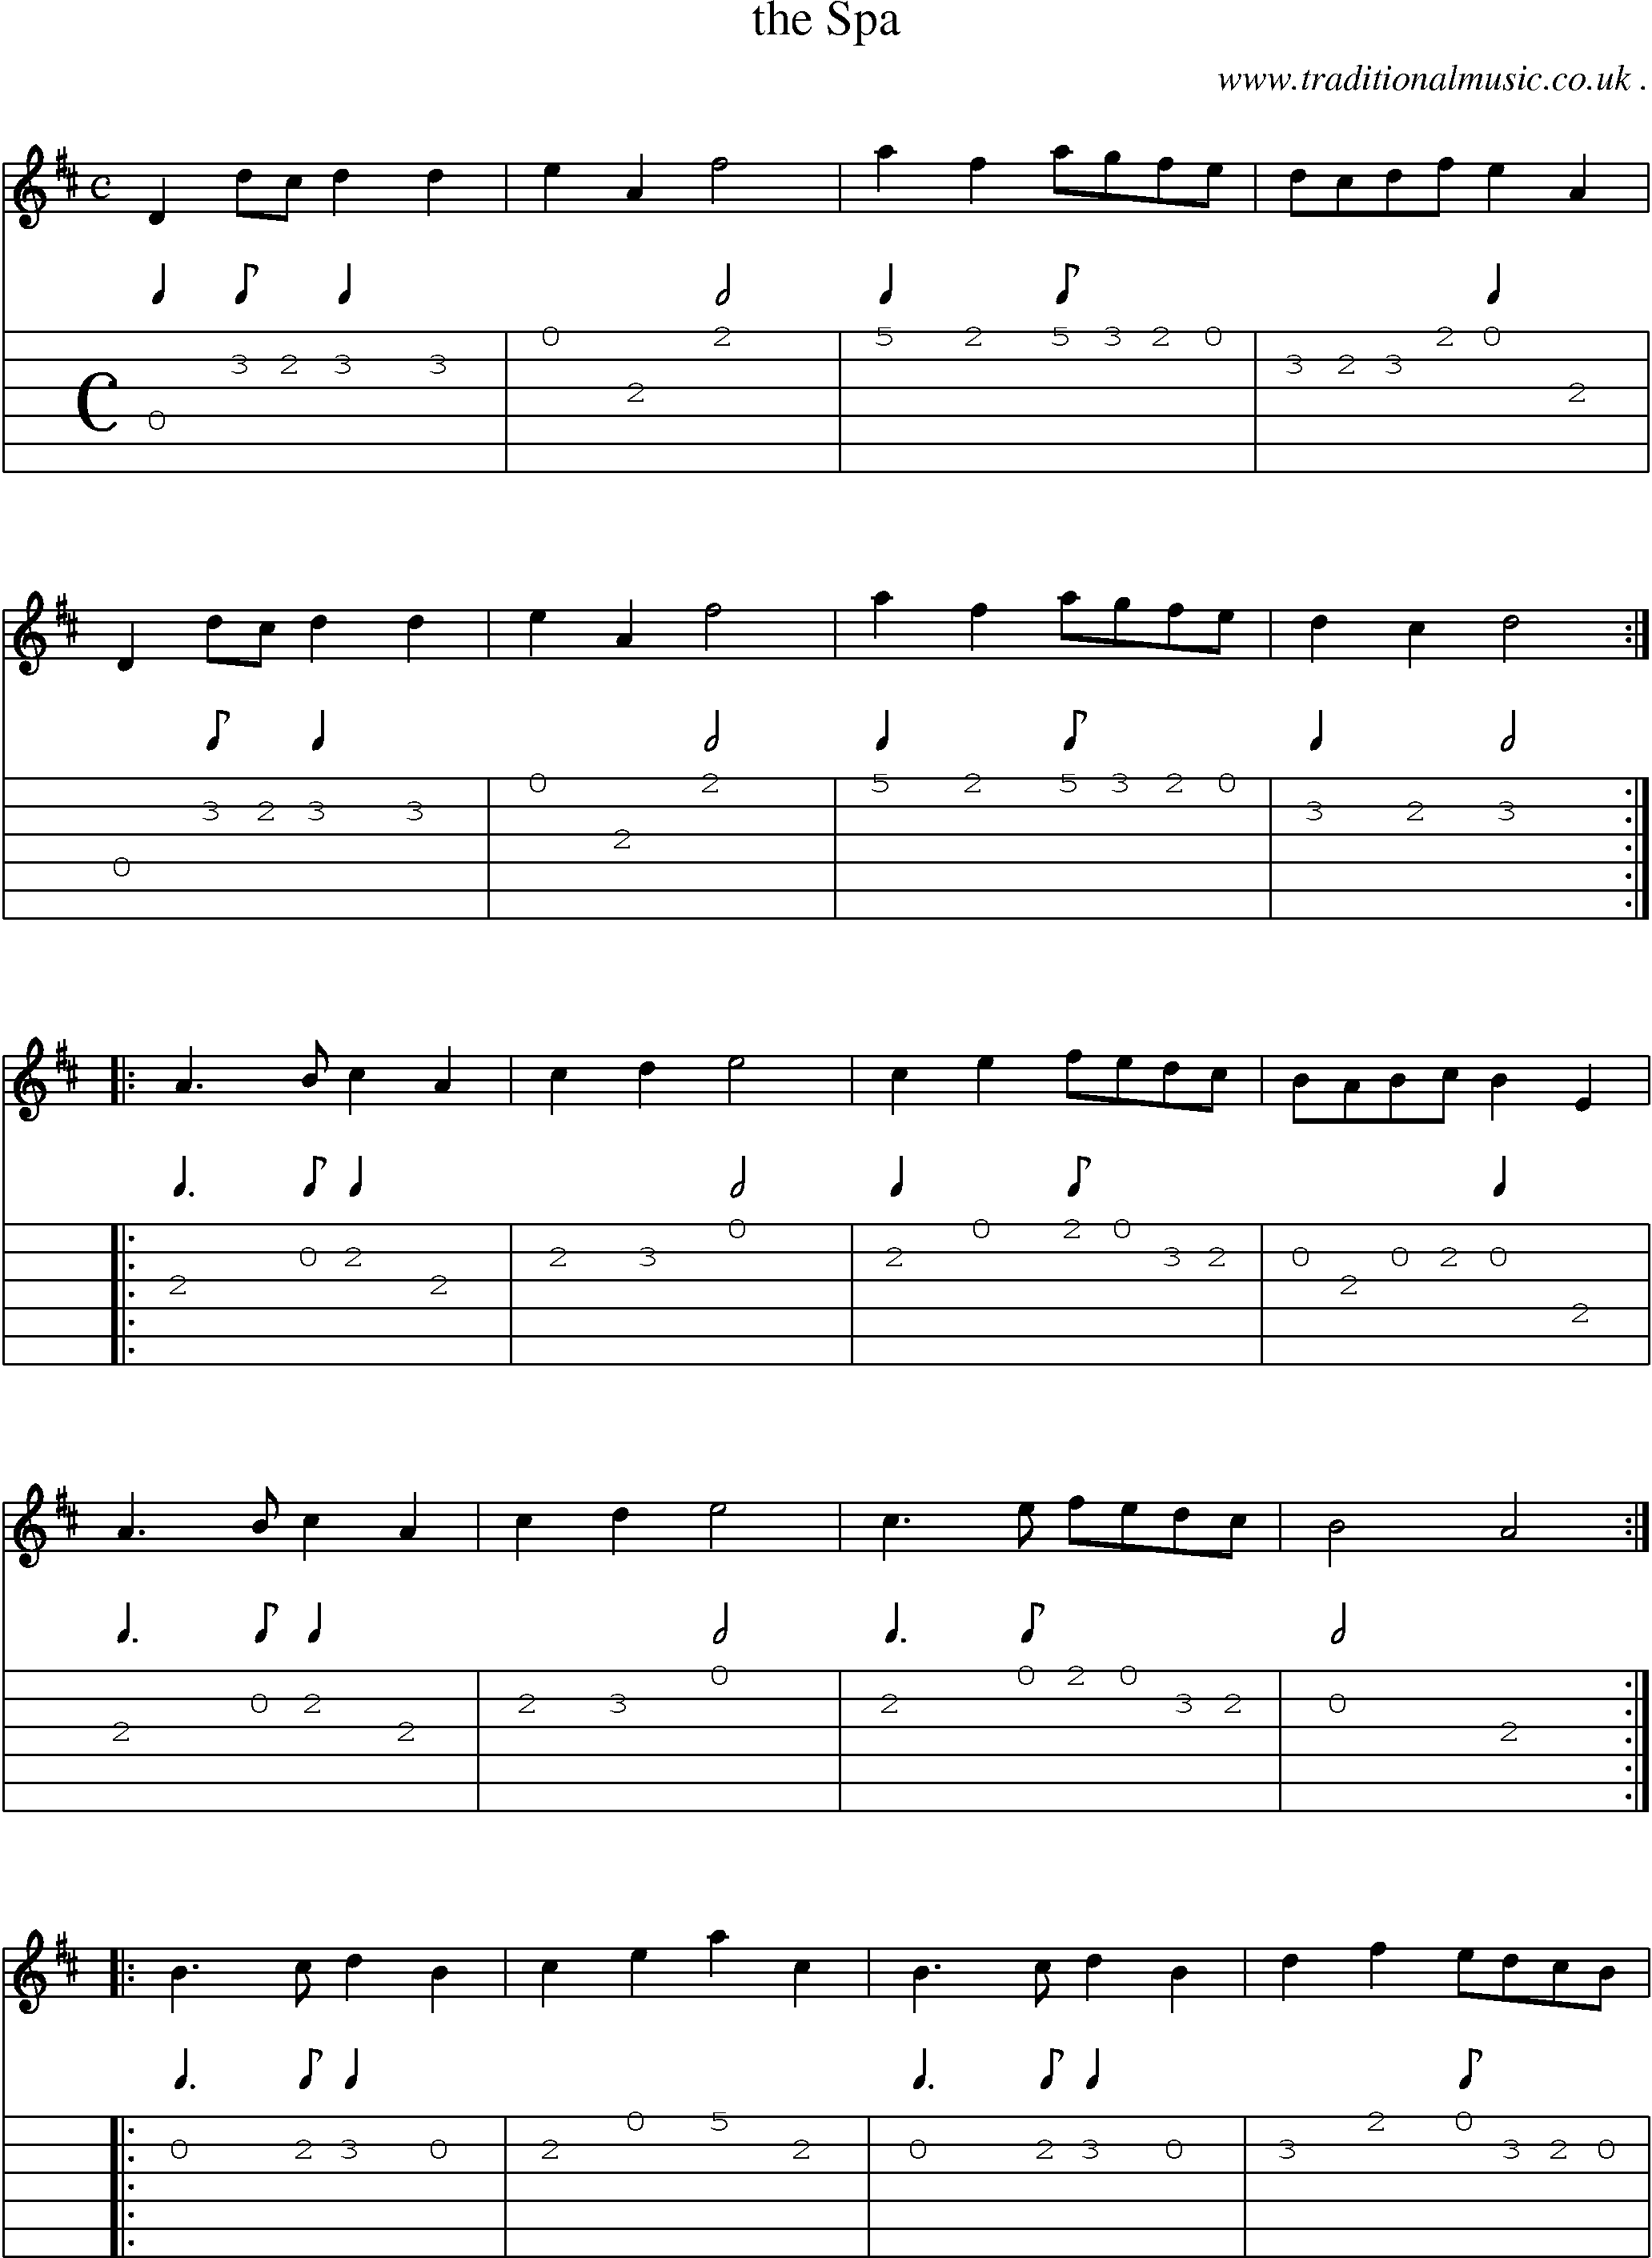 Sheet-Music and Guitar Tabs for The Spa